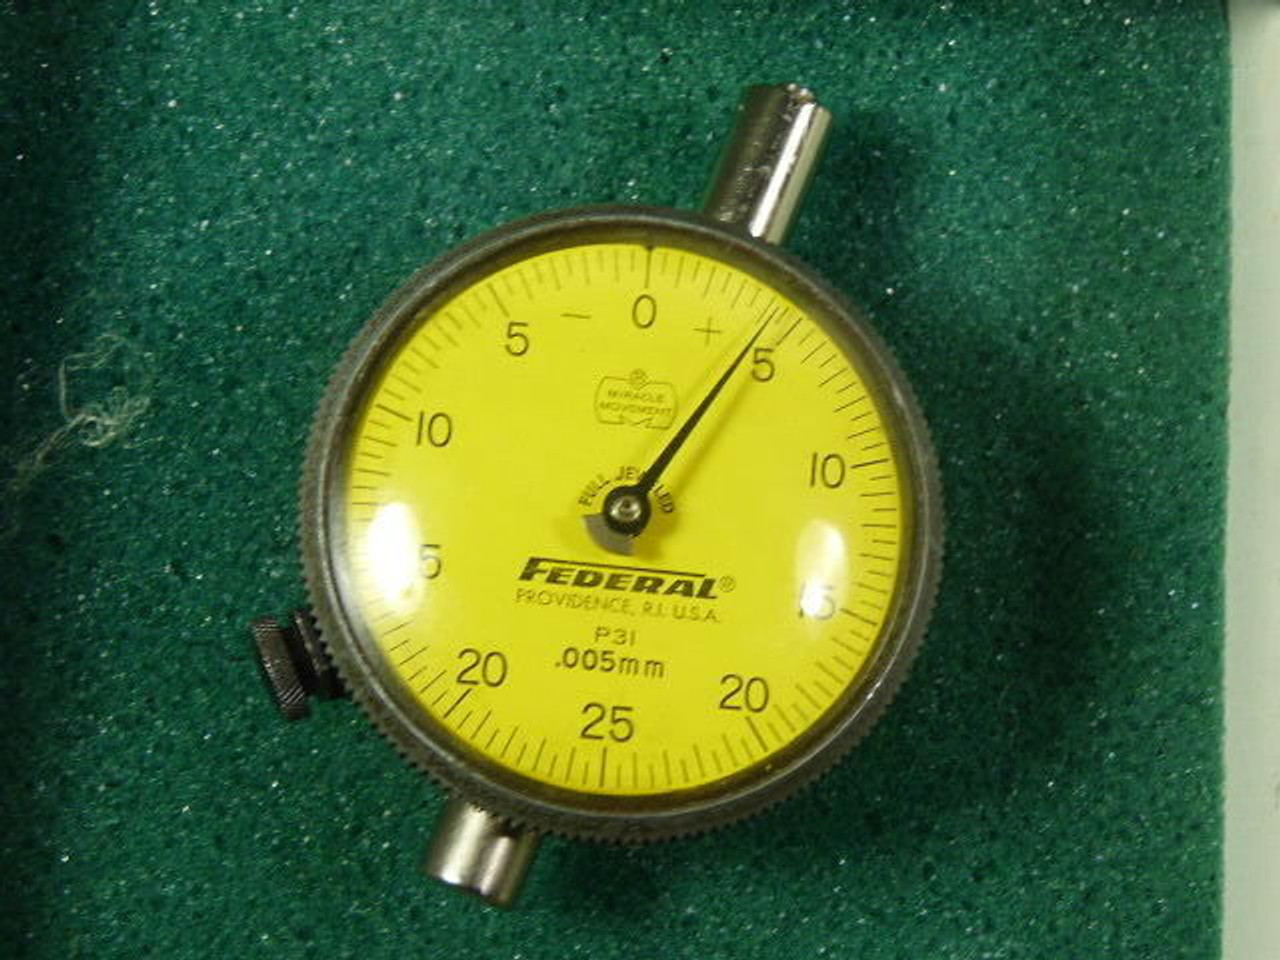 Federal P3I Dial Indicator 0.005mm AS IS